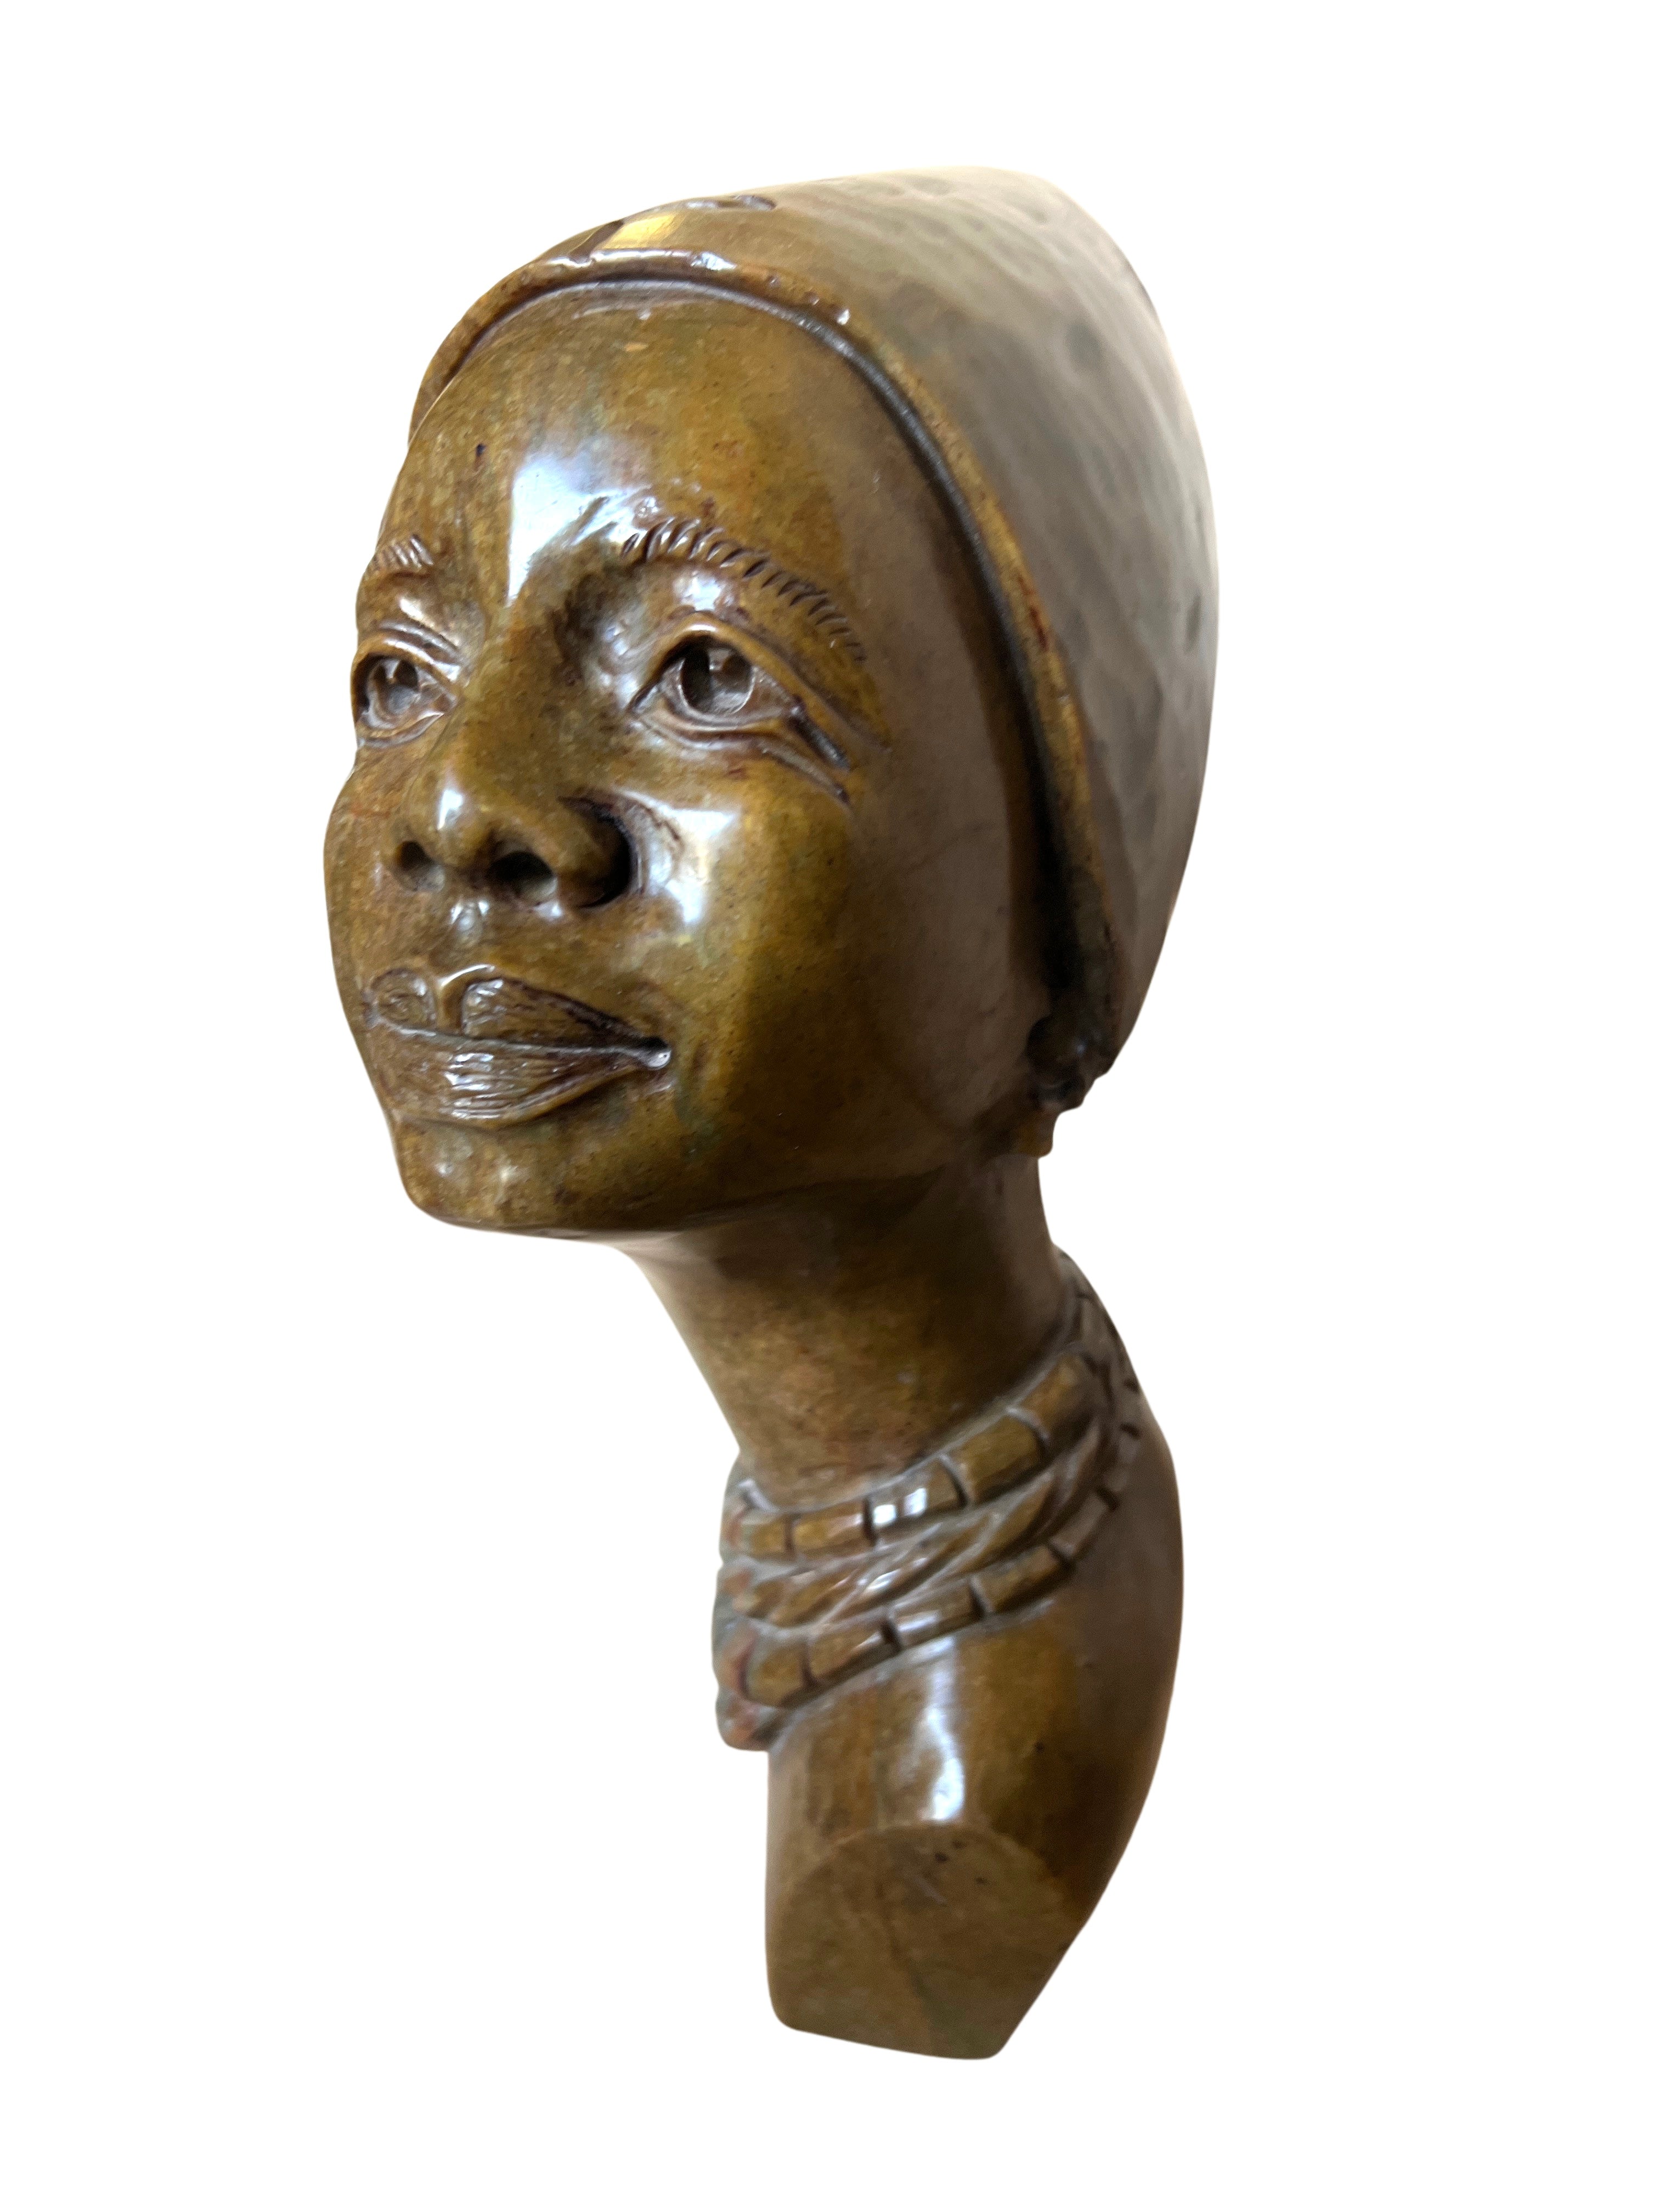 Shona Tribe Fruit Serpentine Lady with hat